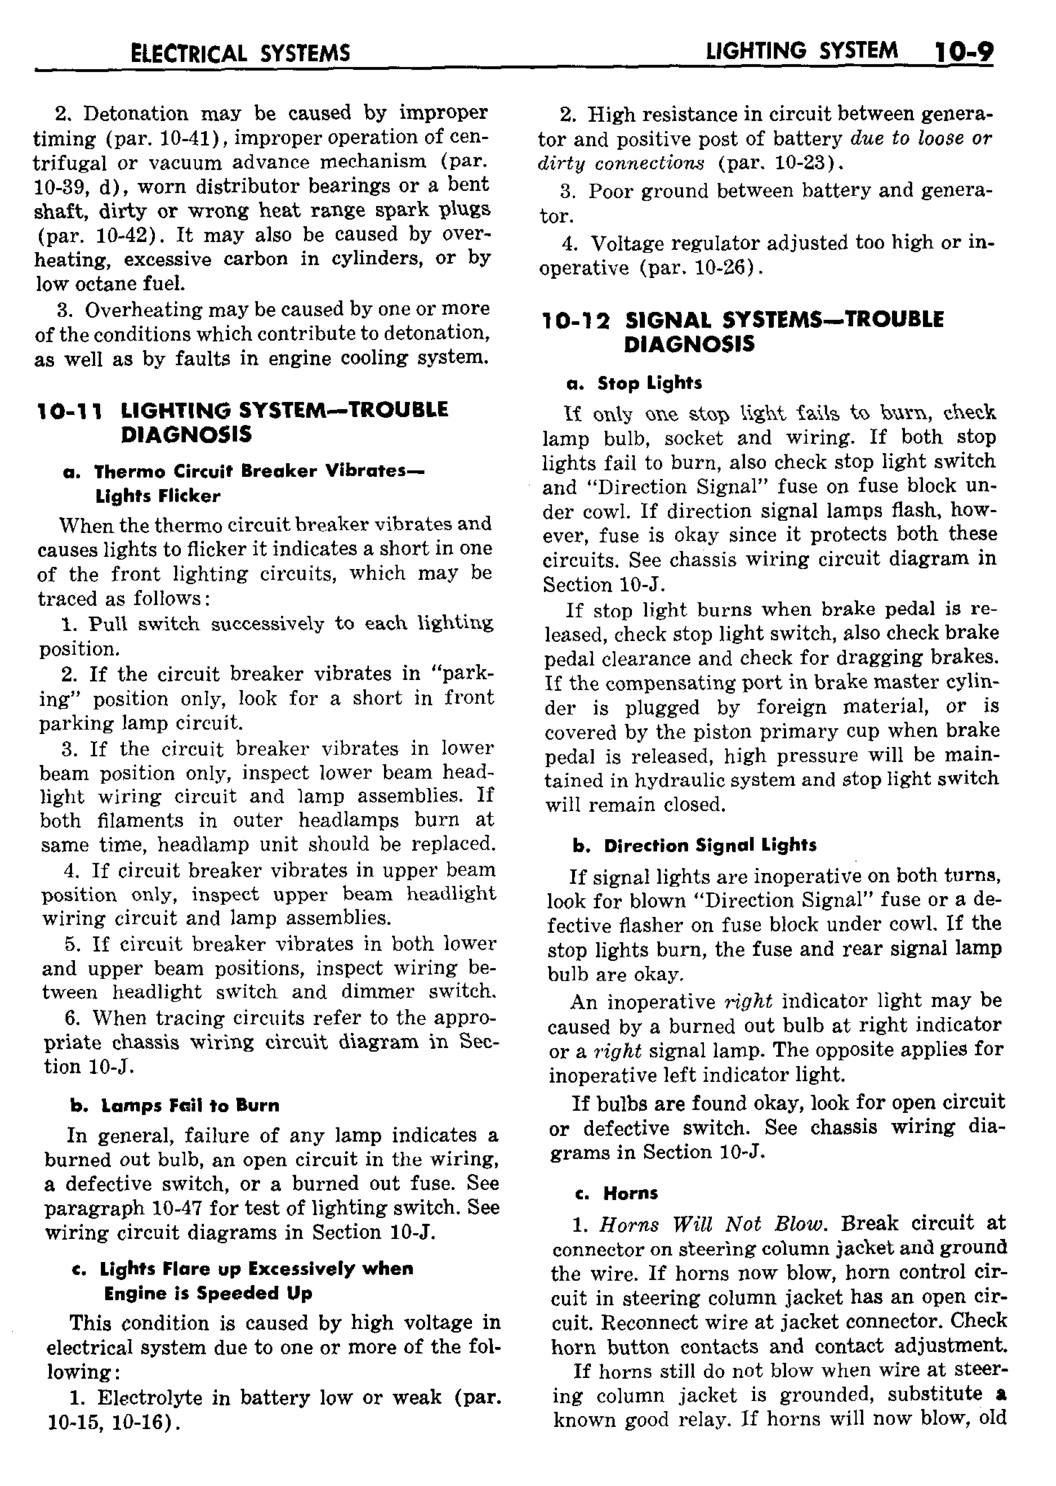 n_11 1959 Buick Shop Manual - Electrical Systems-009-009.jpg